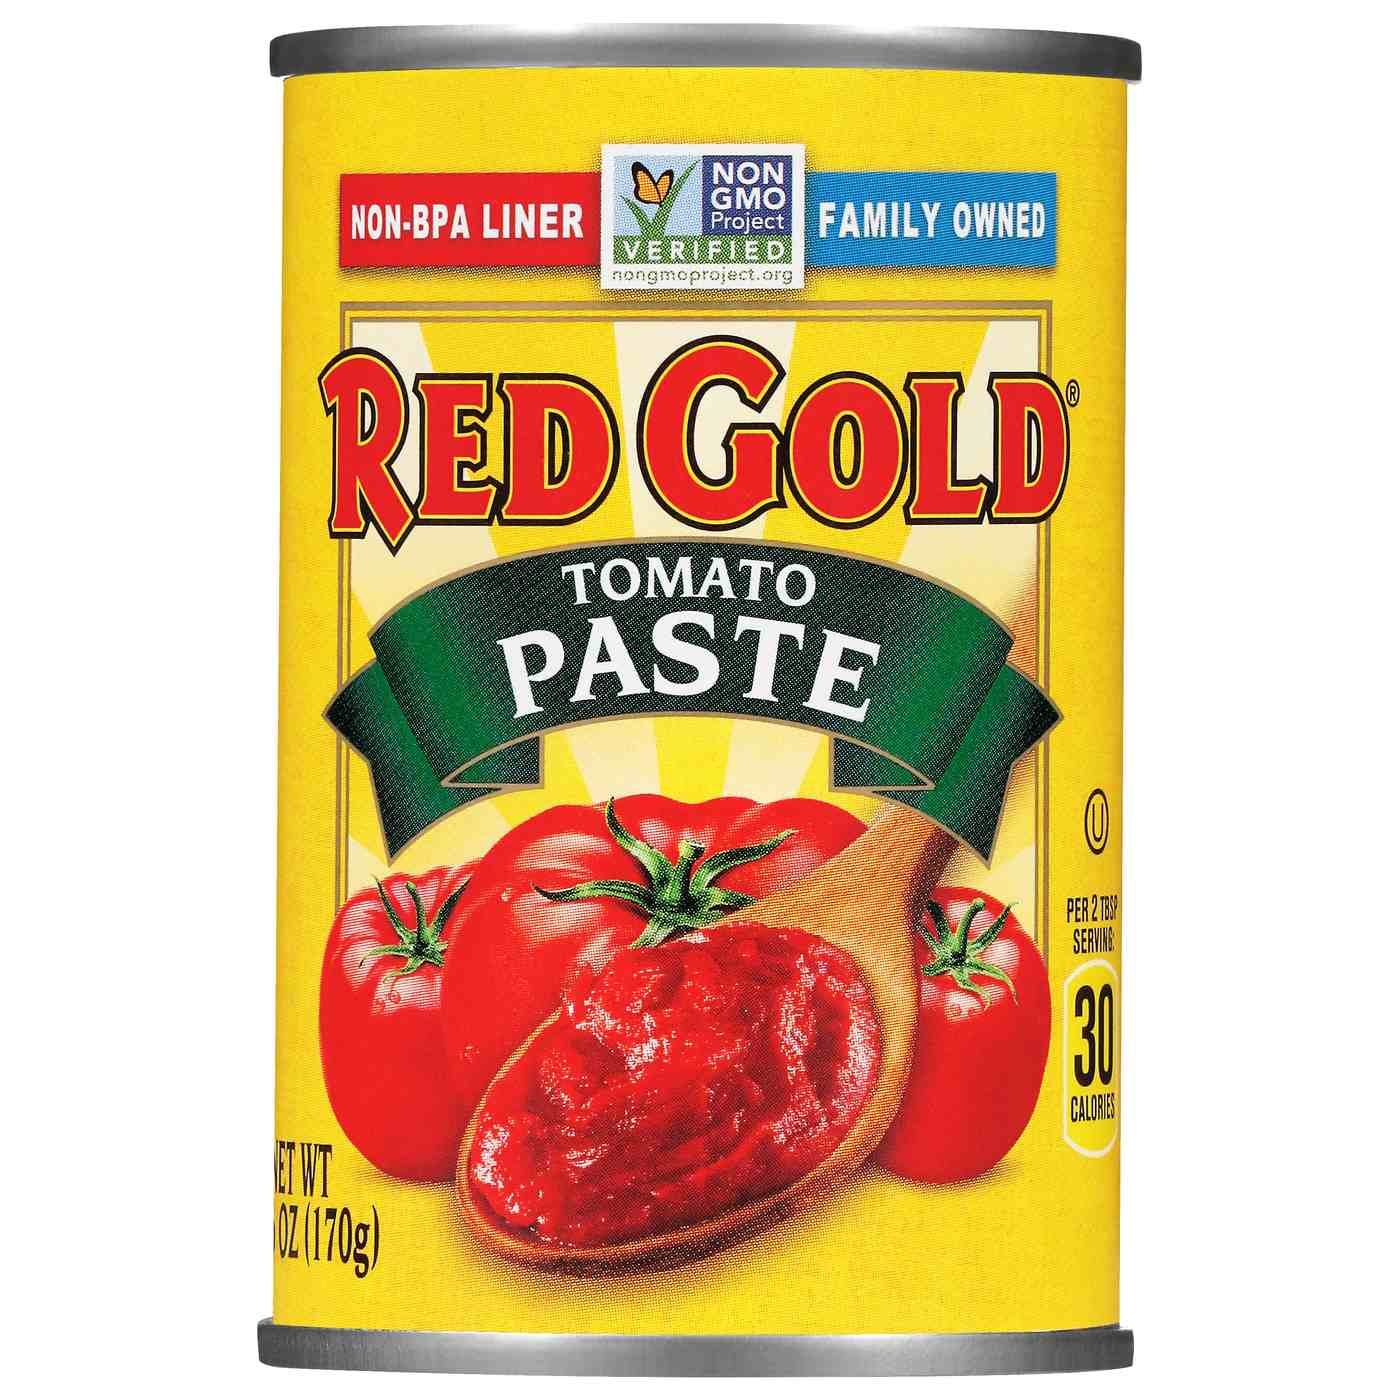 Red Gold Tomato Paste; image 1 of 2